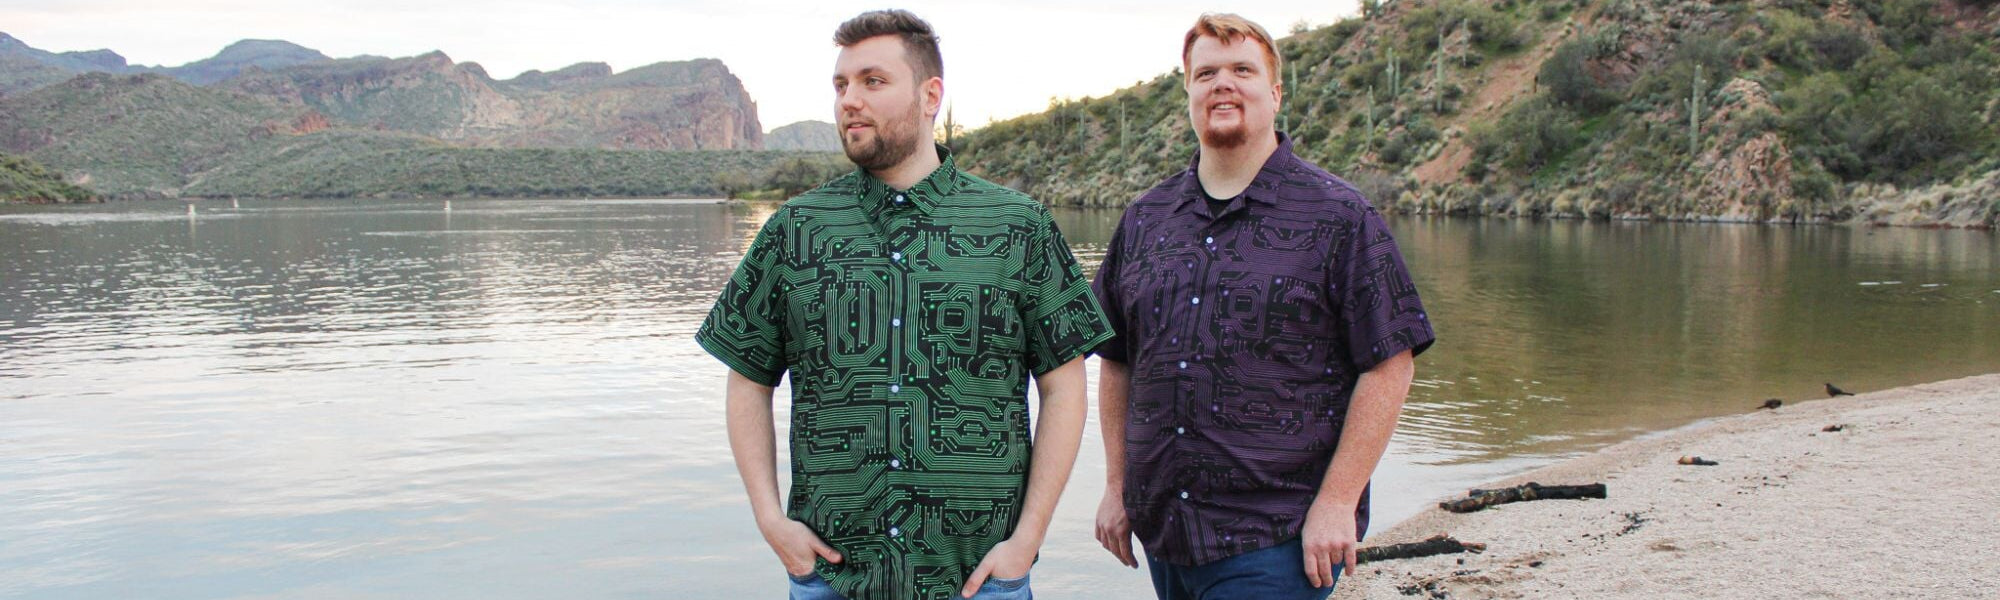 Two men wearing cool tropical button-up shirts with a unique print of computer circuit boards. These geeky shirts are perfect for men who love technology and want to show off their inner geek.